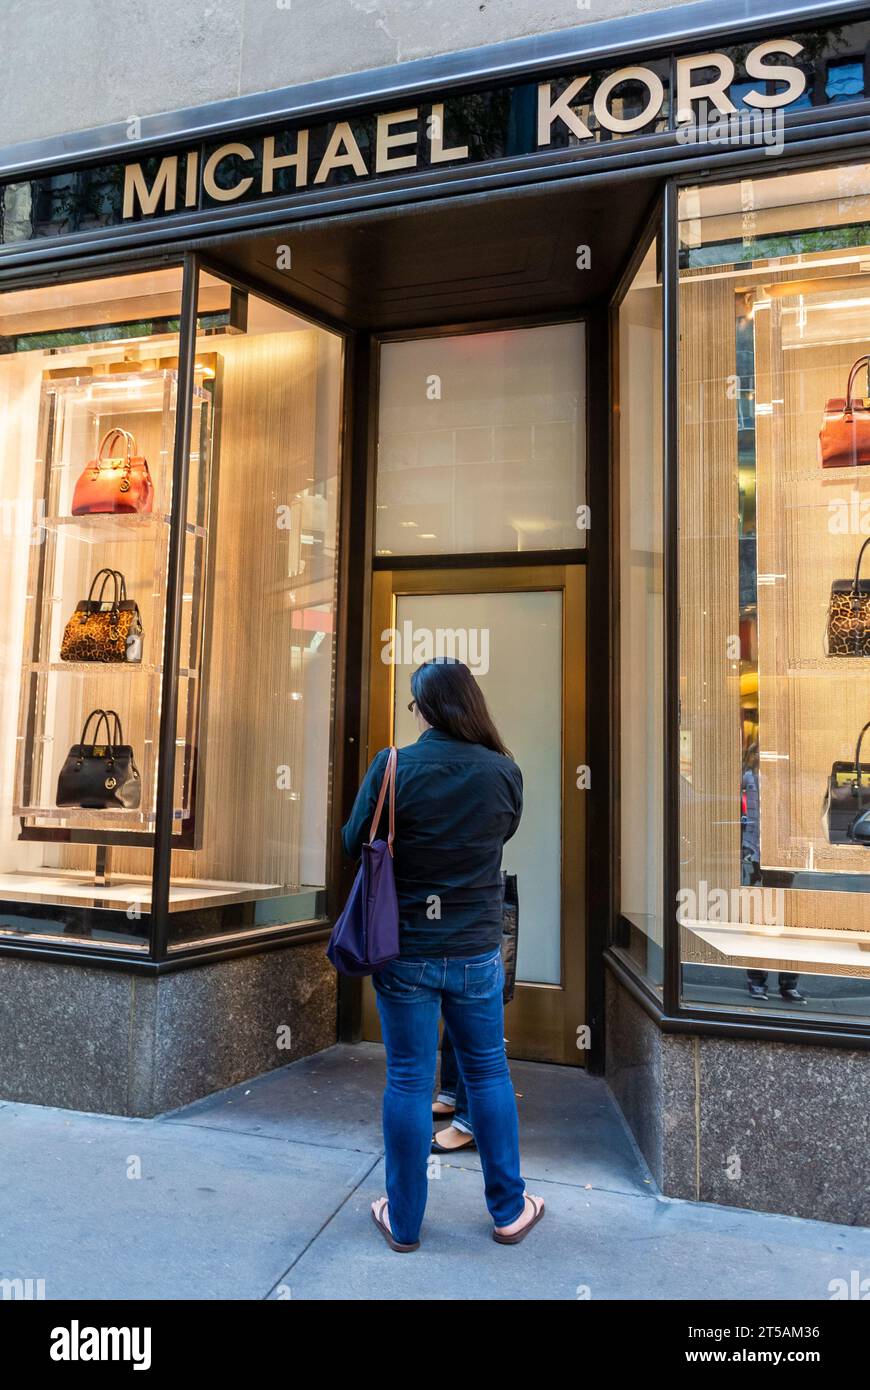 New York City, NY, USA, Michael Kors, Woman Standing in Front, Luxury Fashion Store Front, Fifth Ave., WIndow Display, Women's Bags Stock Photo